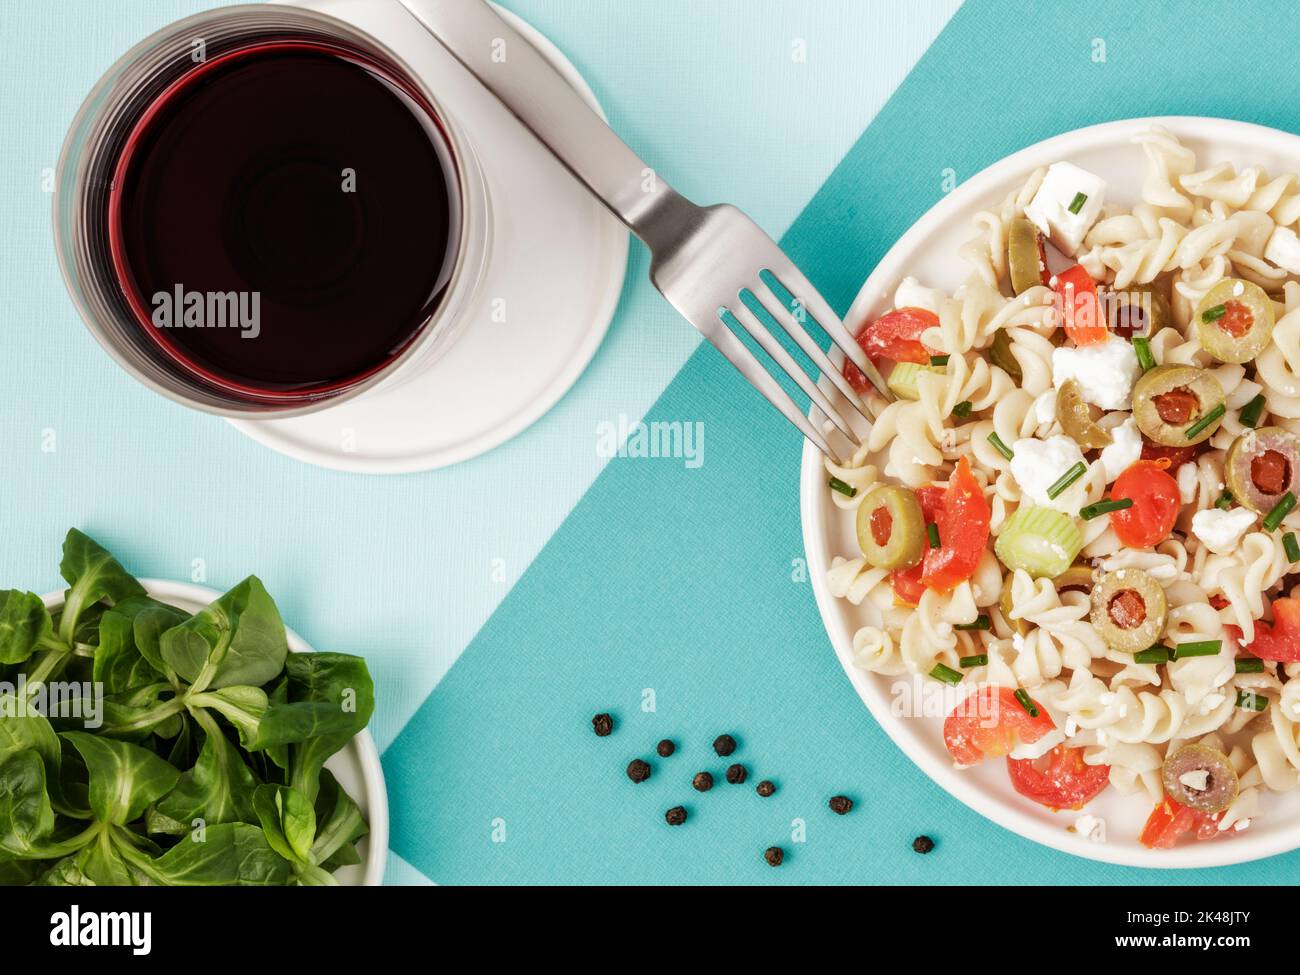 Spelt pasta spirals salad and a glass of red wine Stock Photo